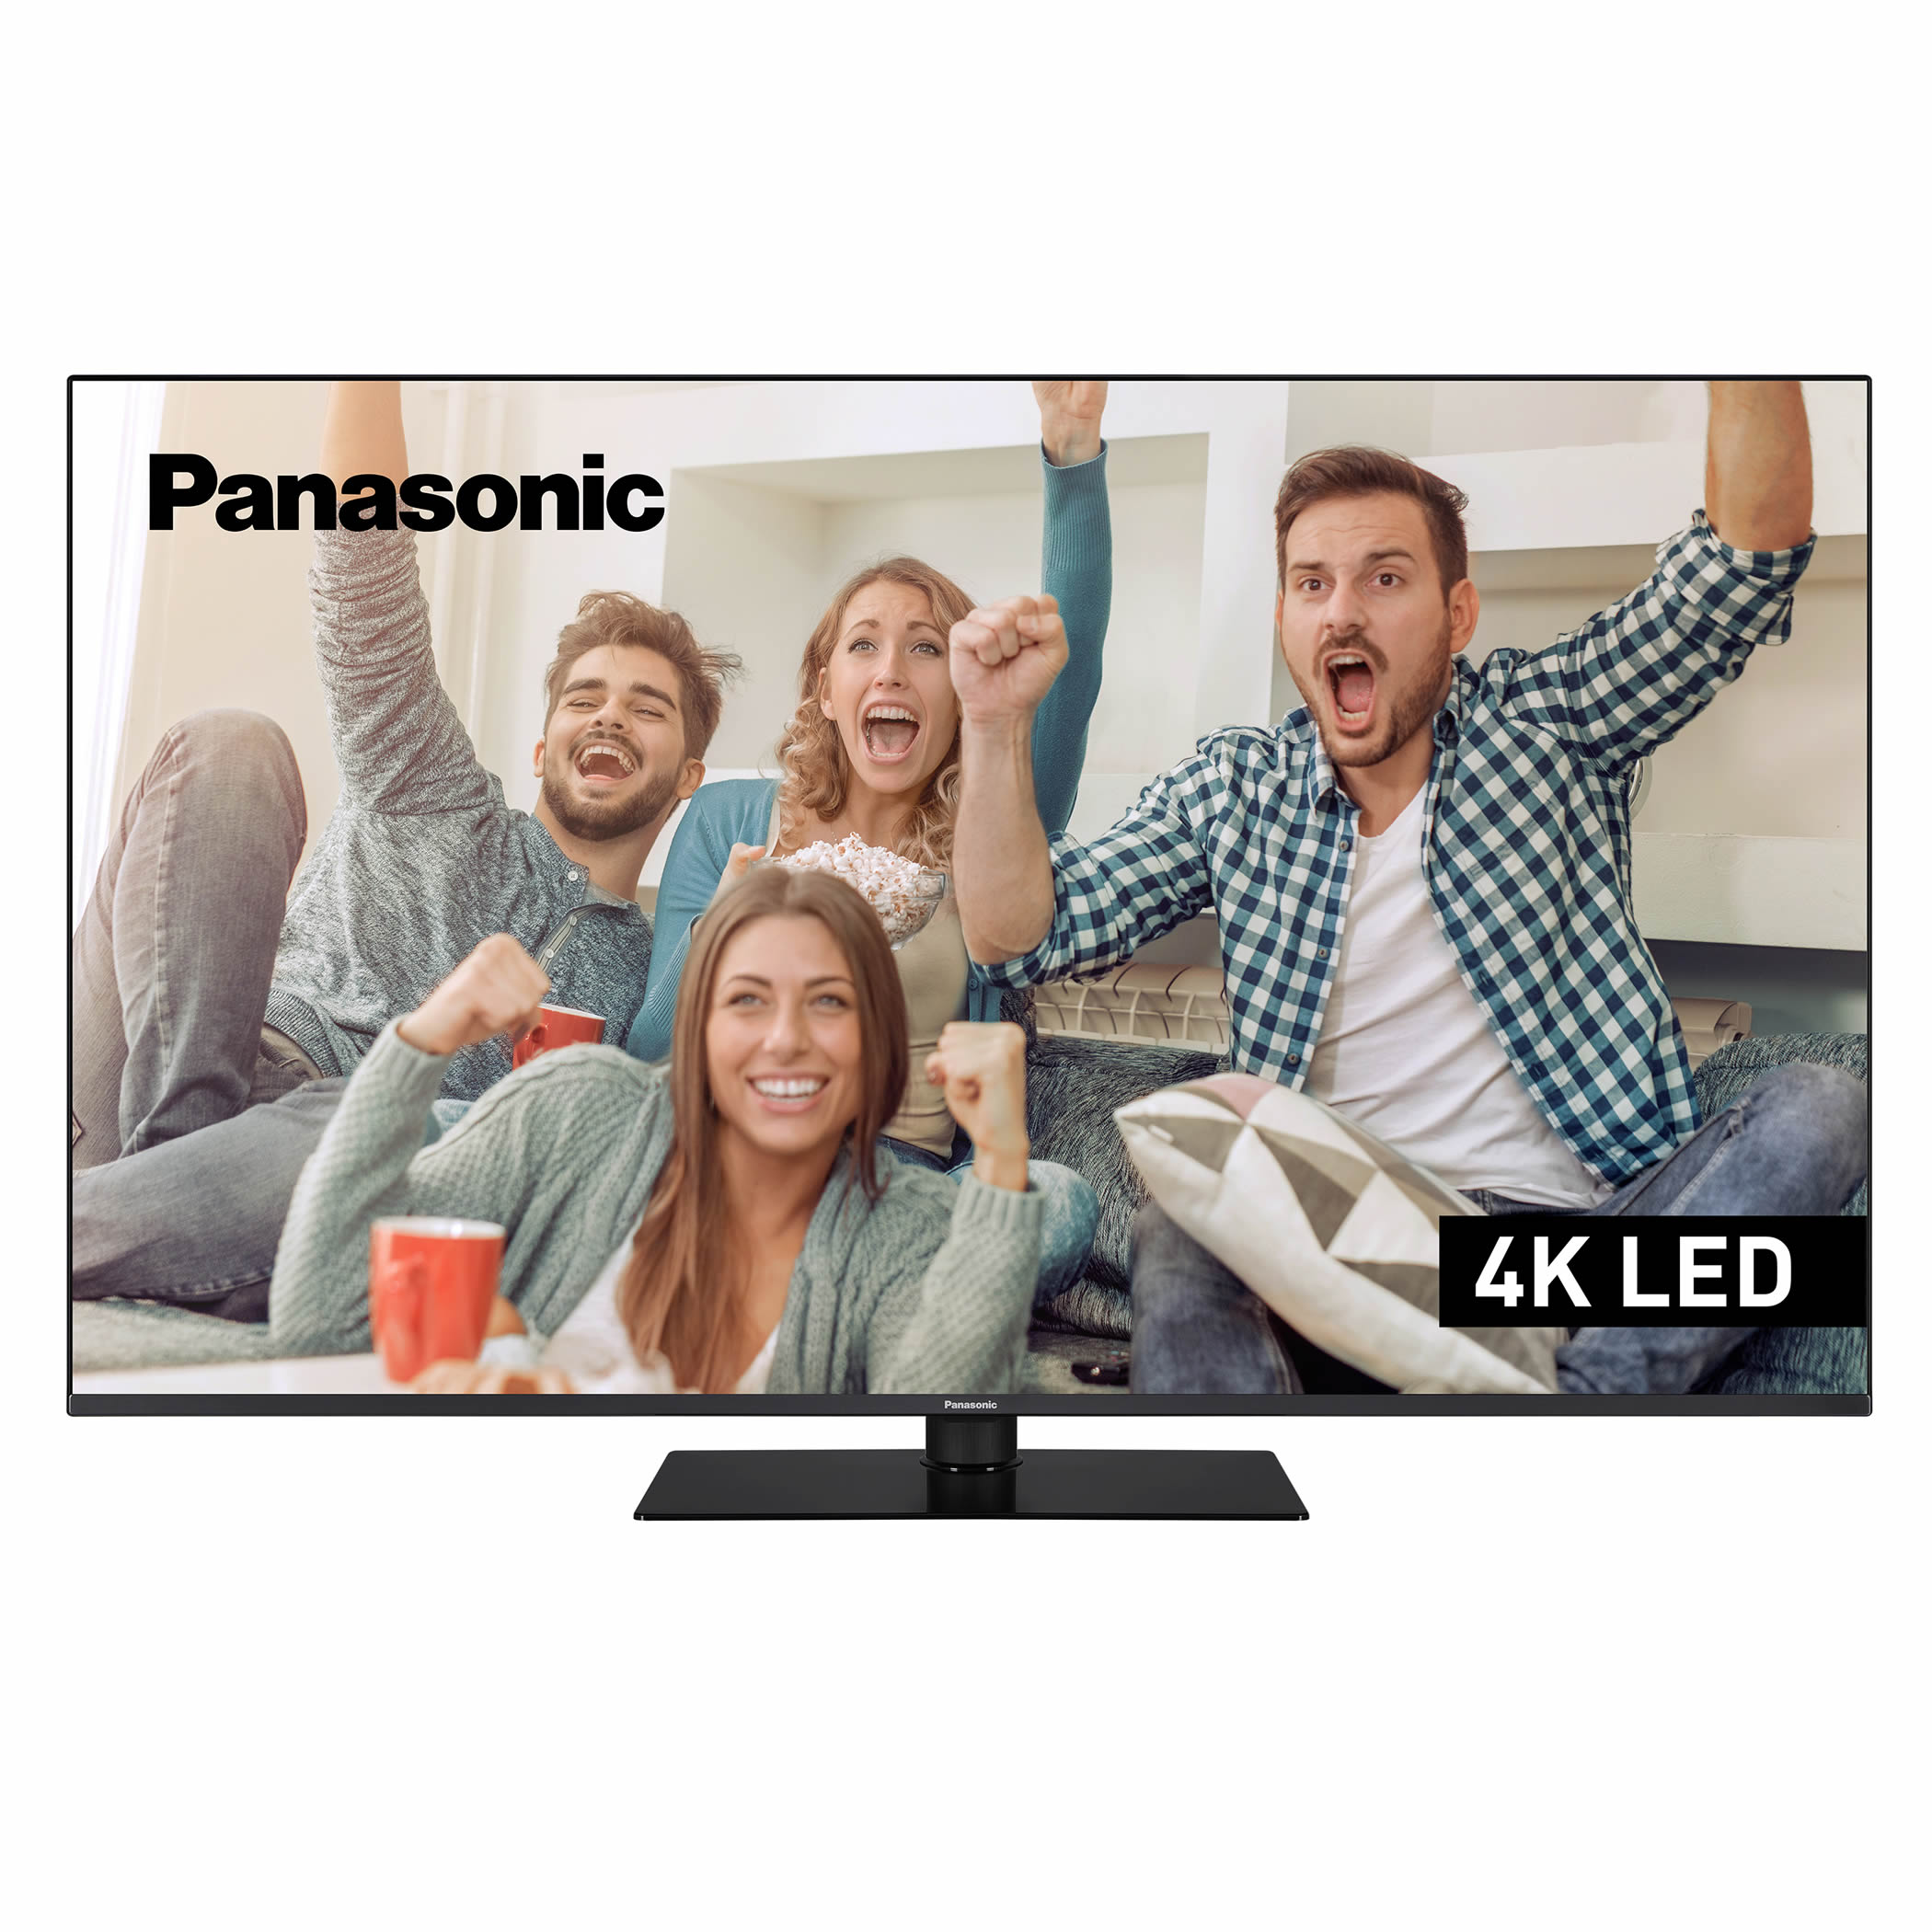 Panasonic 55inch Ultra HD 4K LED HDR10 SMART TV WiFi Android